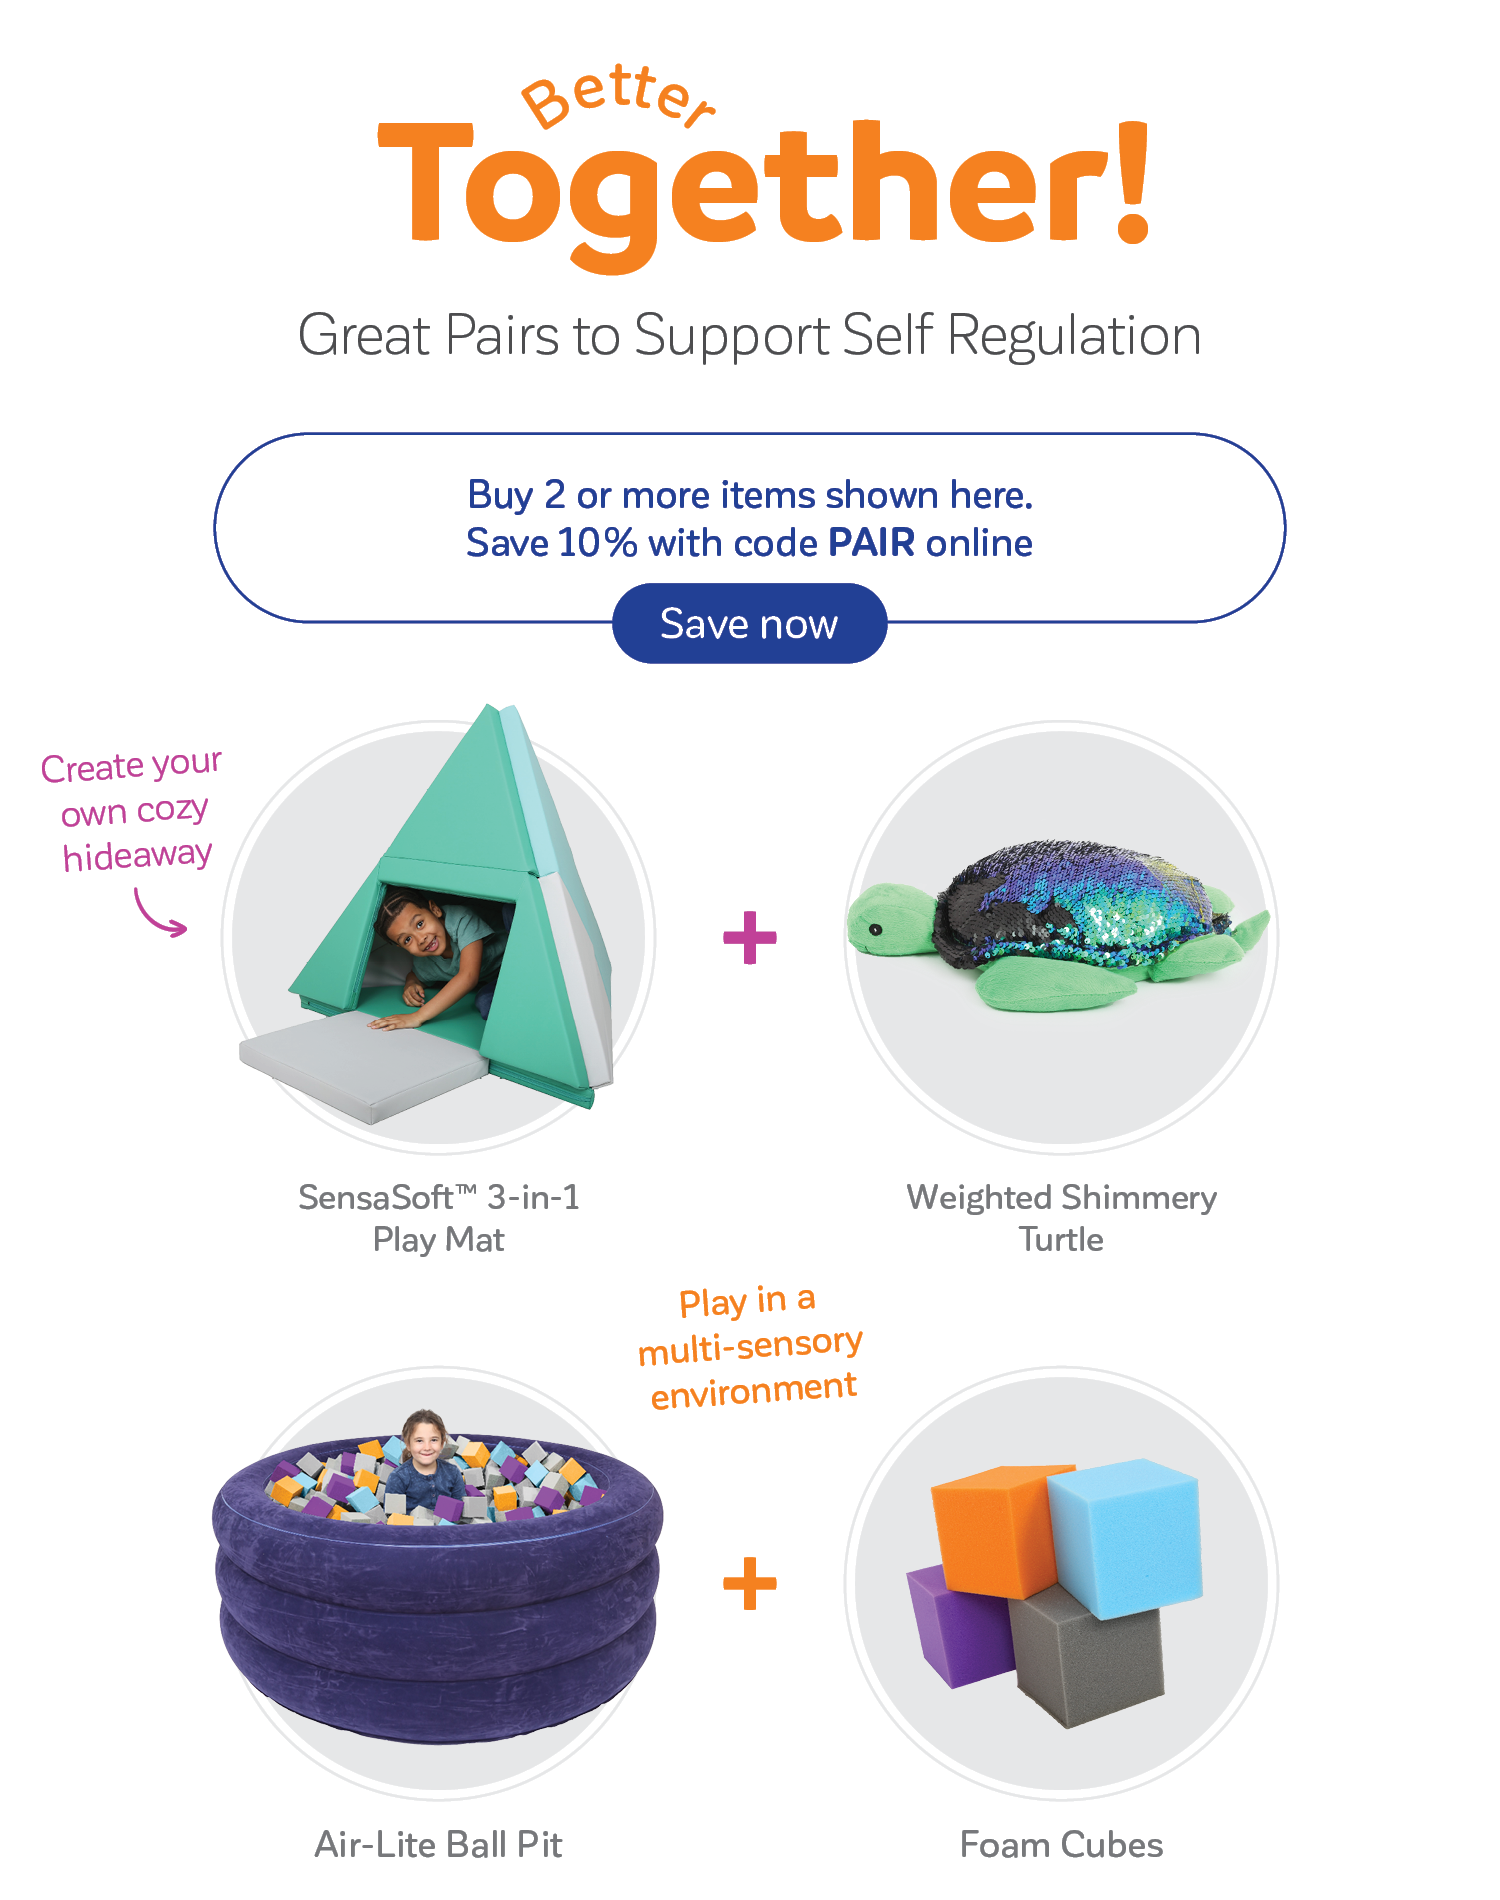 Better Together! Great Pairs to Support Self Regulation